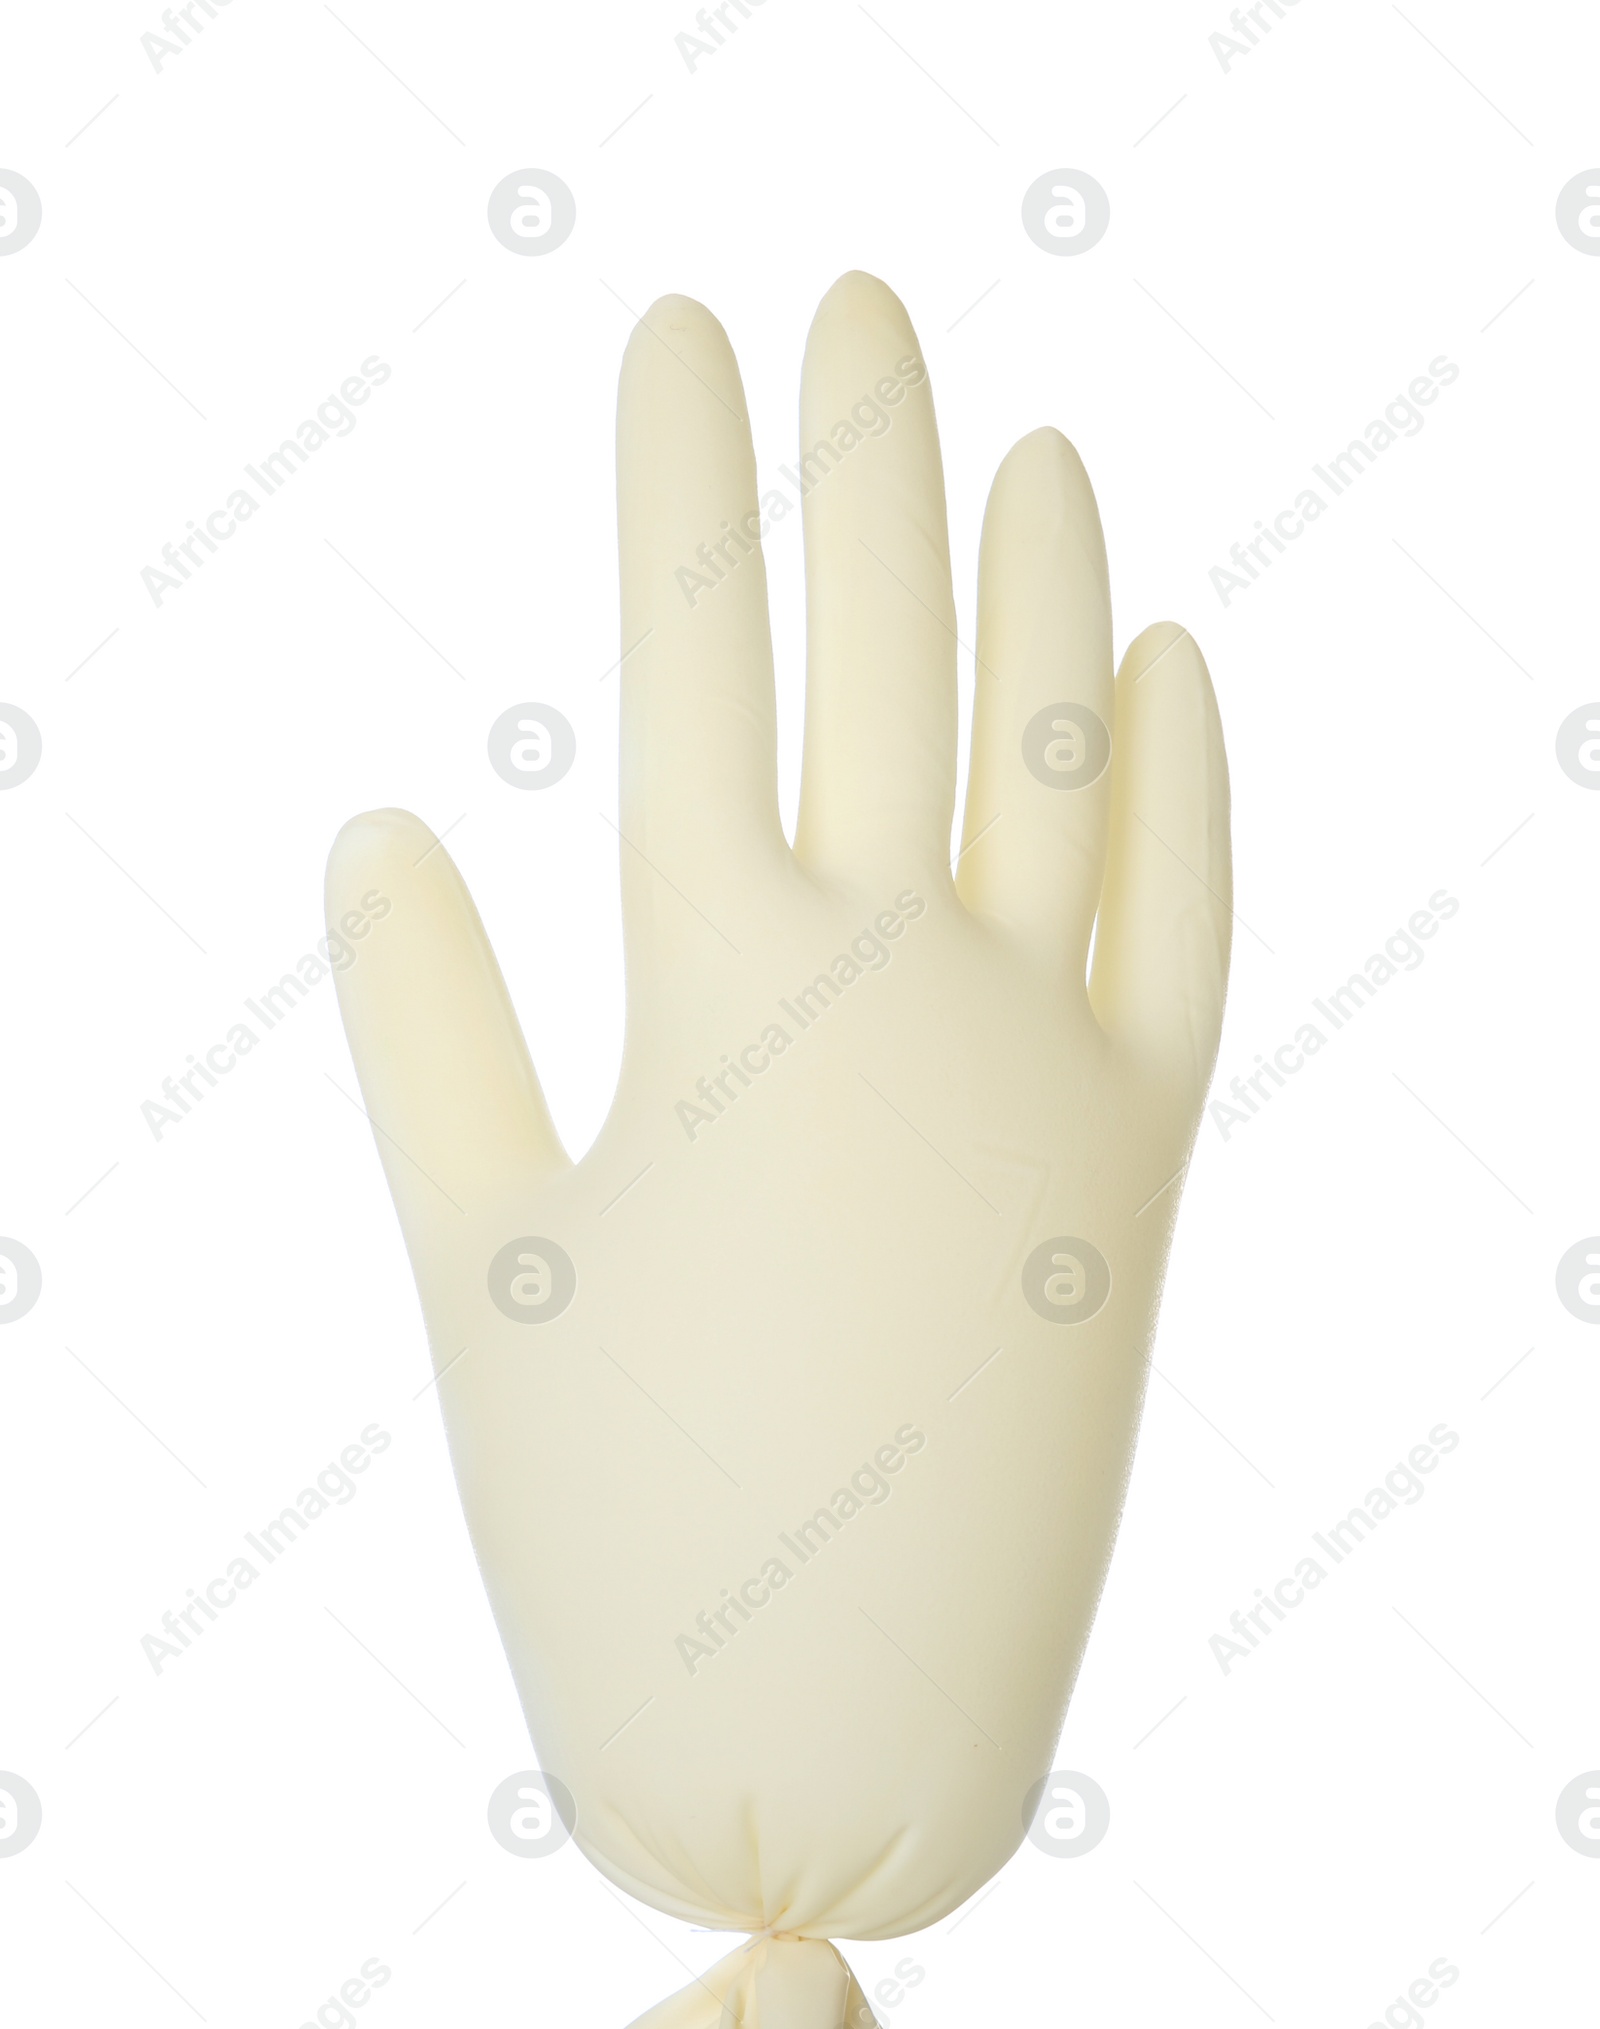 Photo of Inflated sterile medical glove on white background